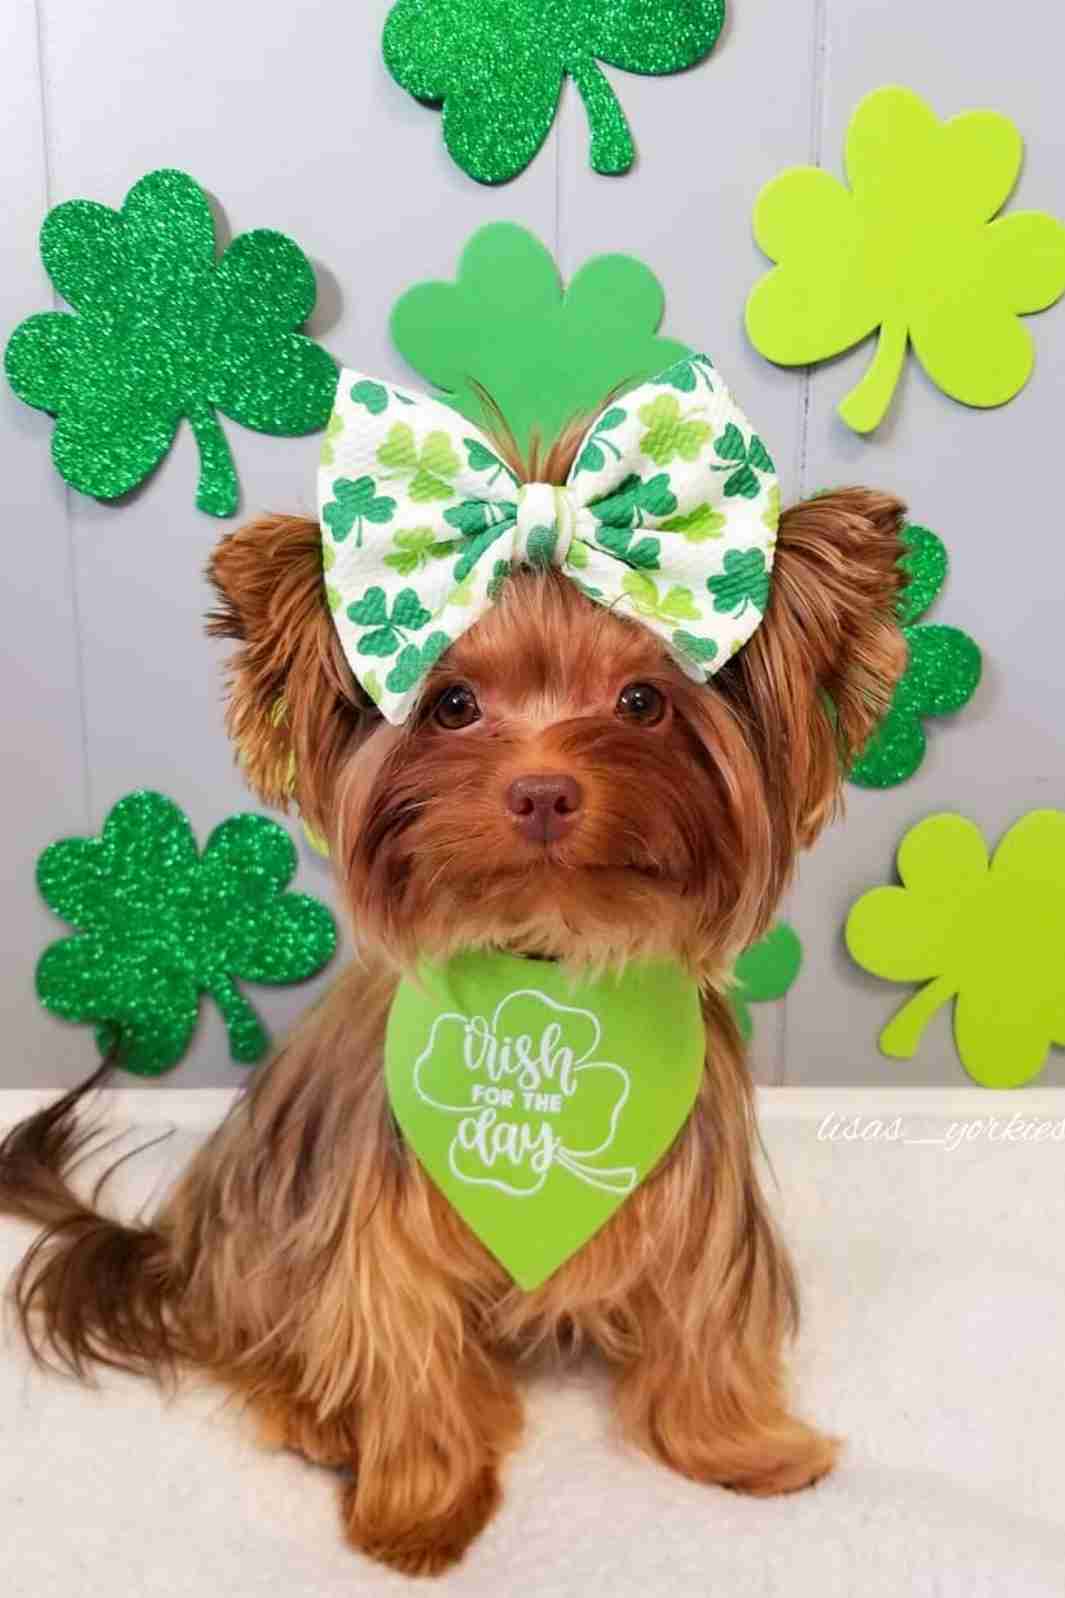 Celebrate Top Ten Saint Patrick's Day costumes for dogs with the Cutest Yorkie Influencer on Instagram @lisas_yorkies 